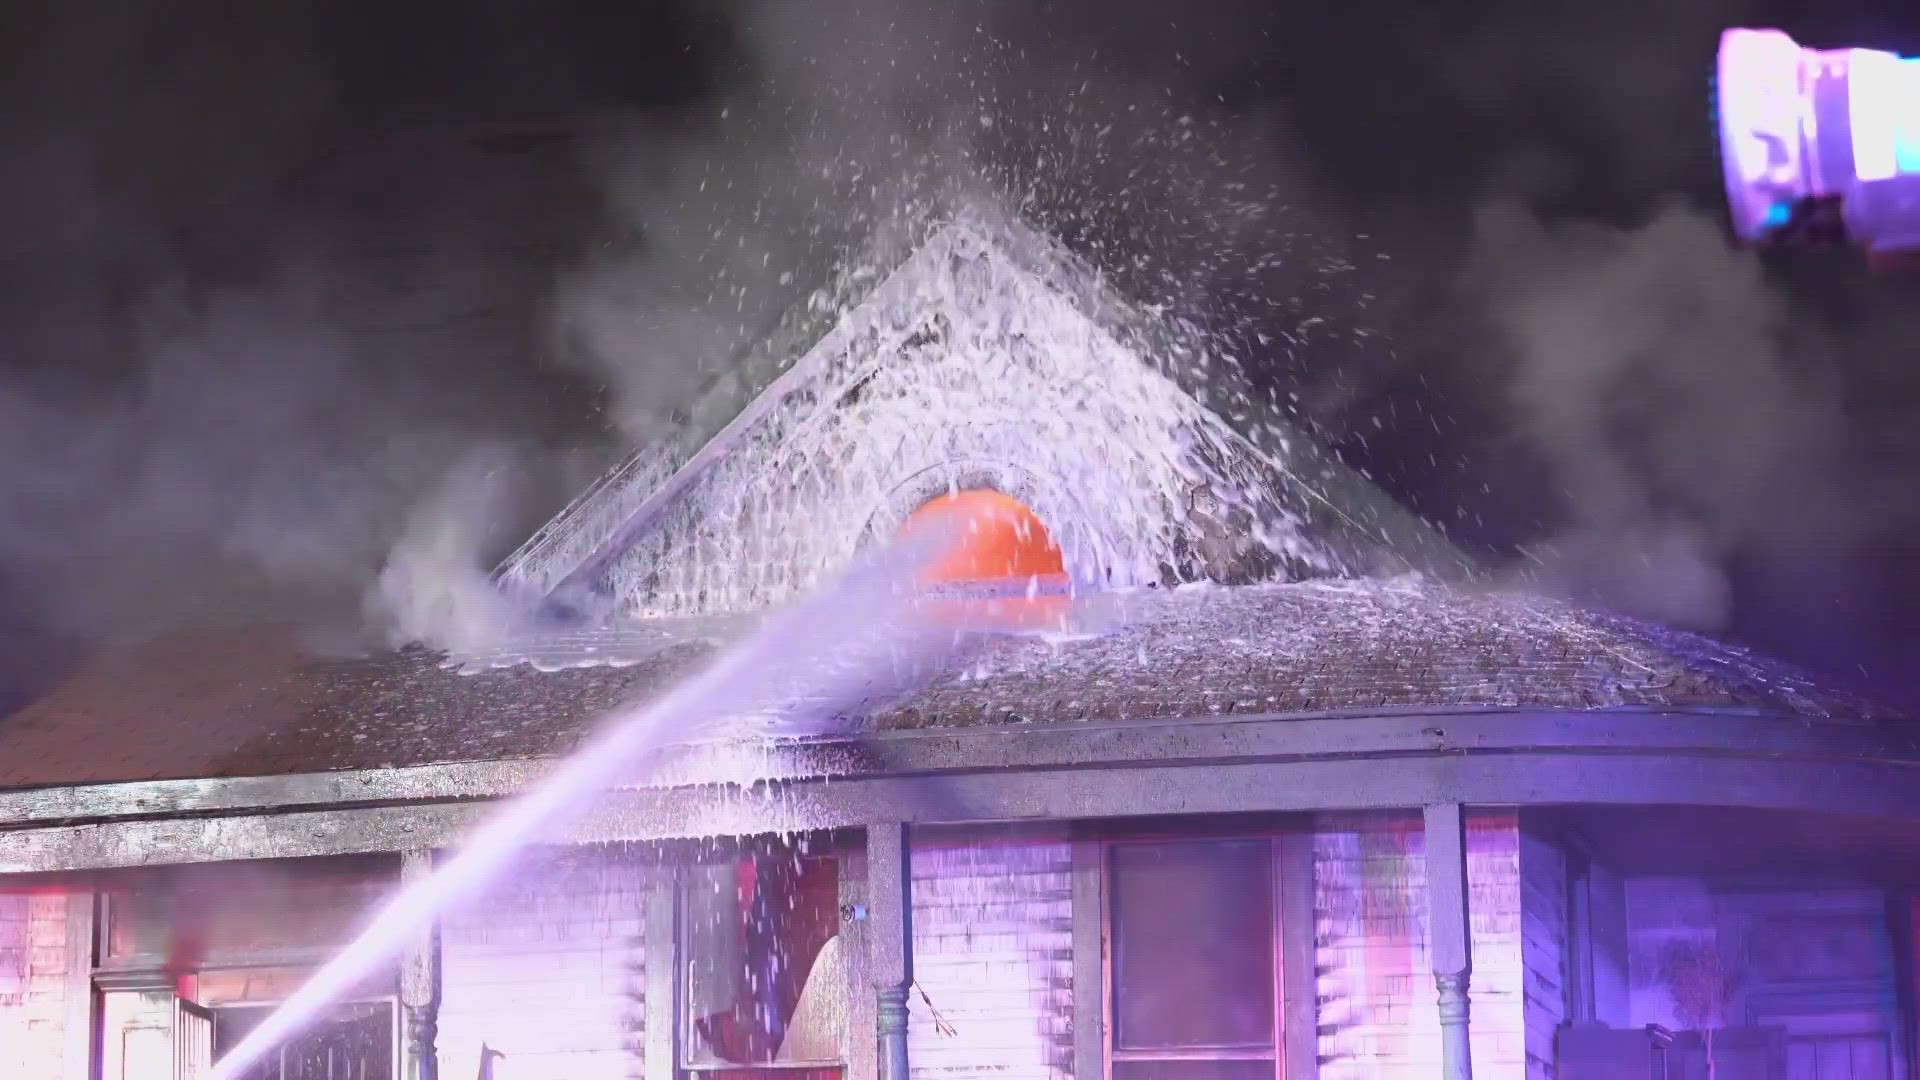 Firefighters had a difficult time fighting the blaze after the flames spread to the attic of the house.